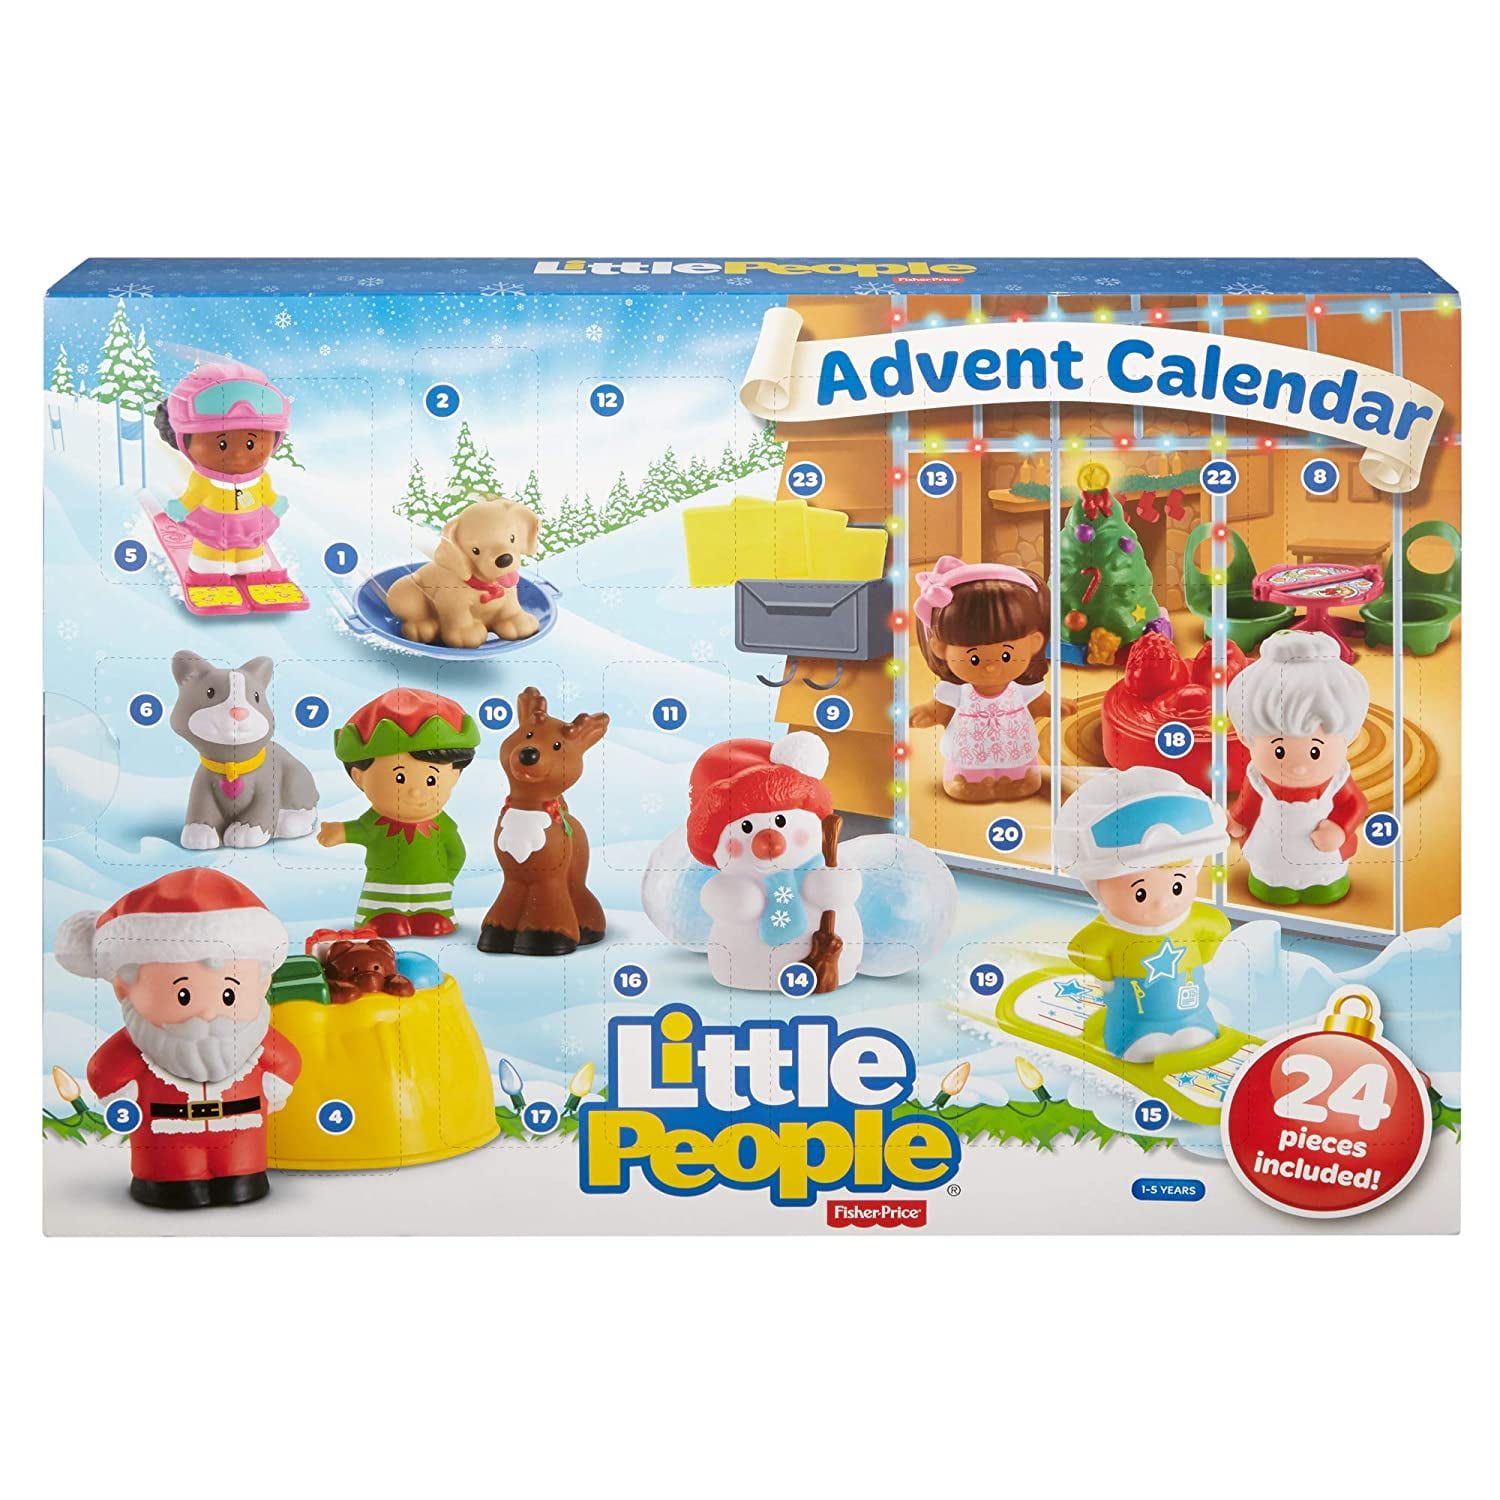 FisherPrice Little People Advent Calendar, Count Down to Christmas